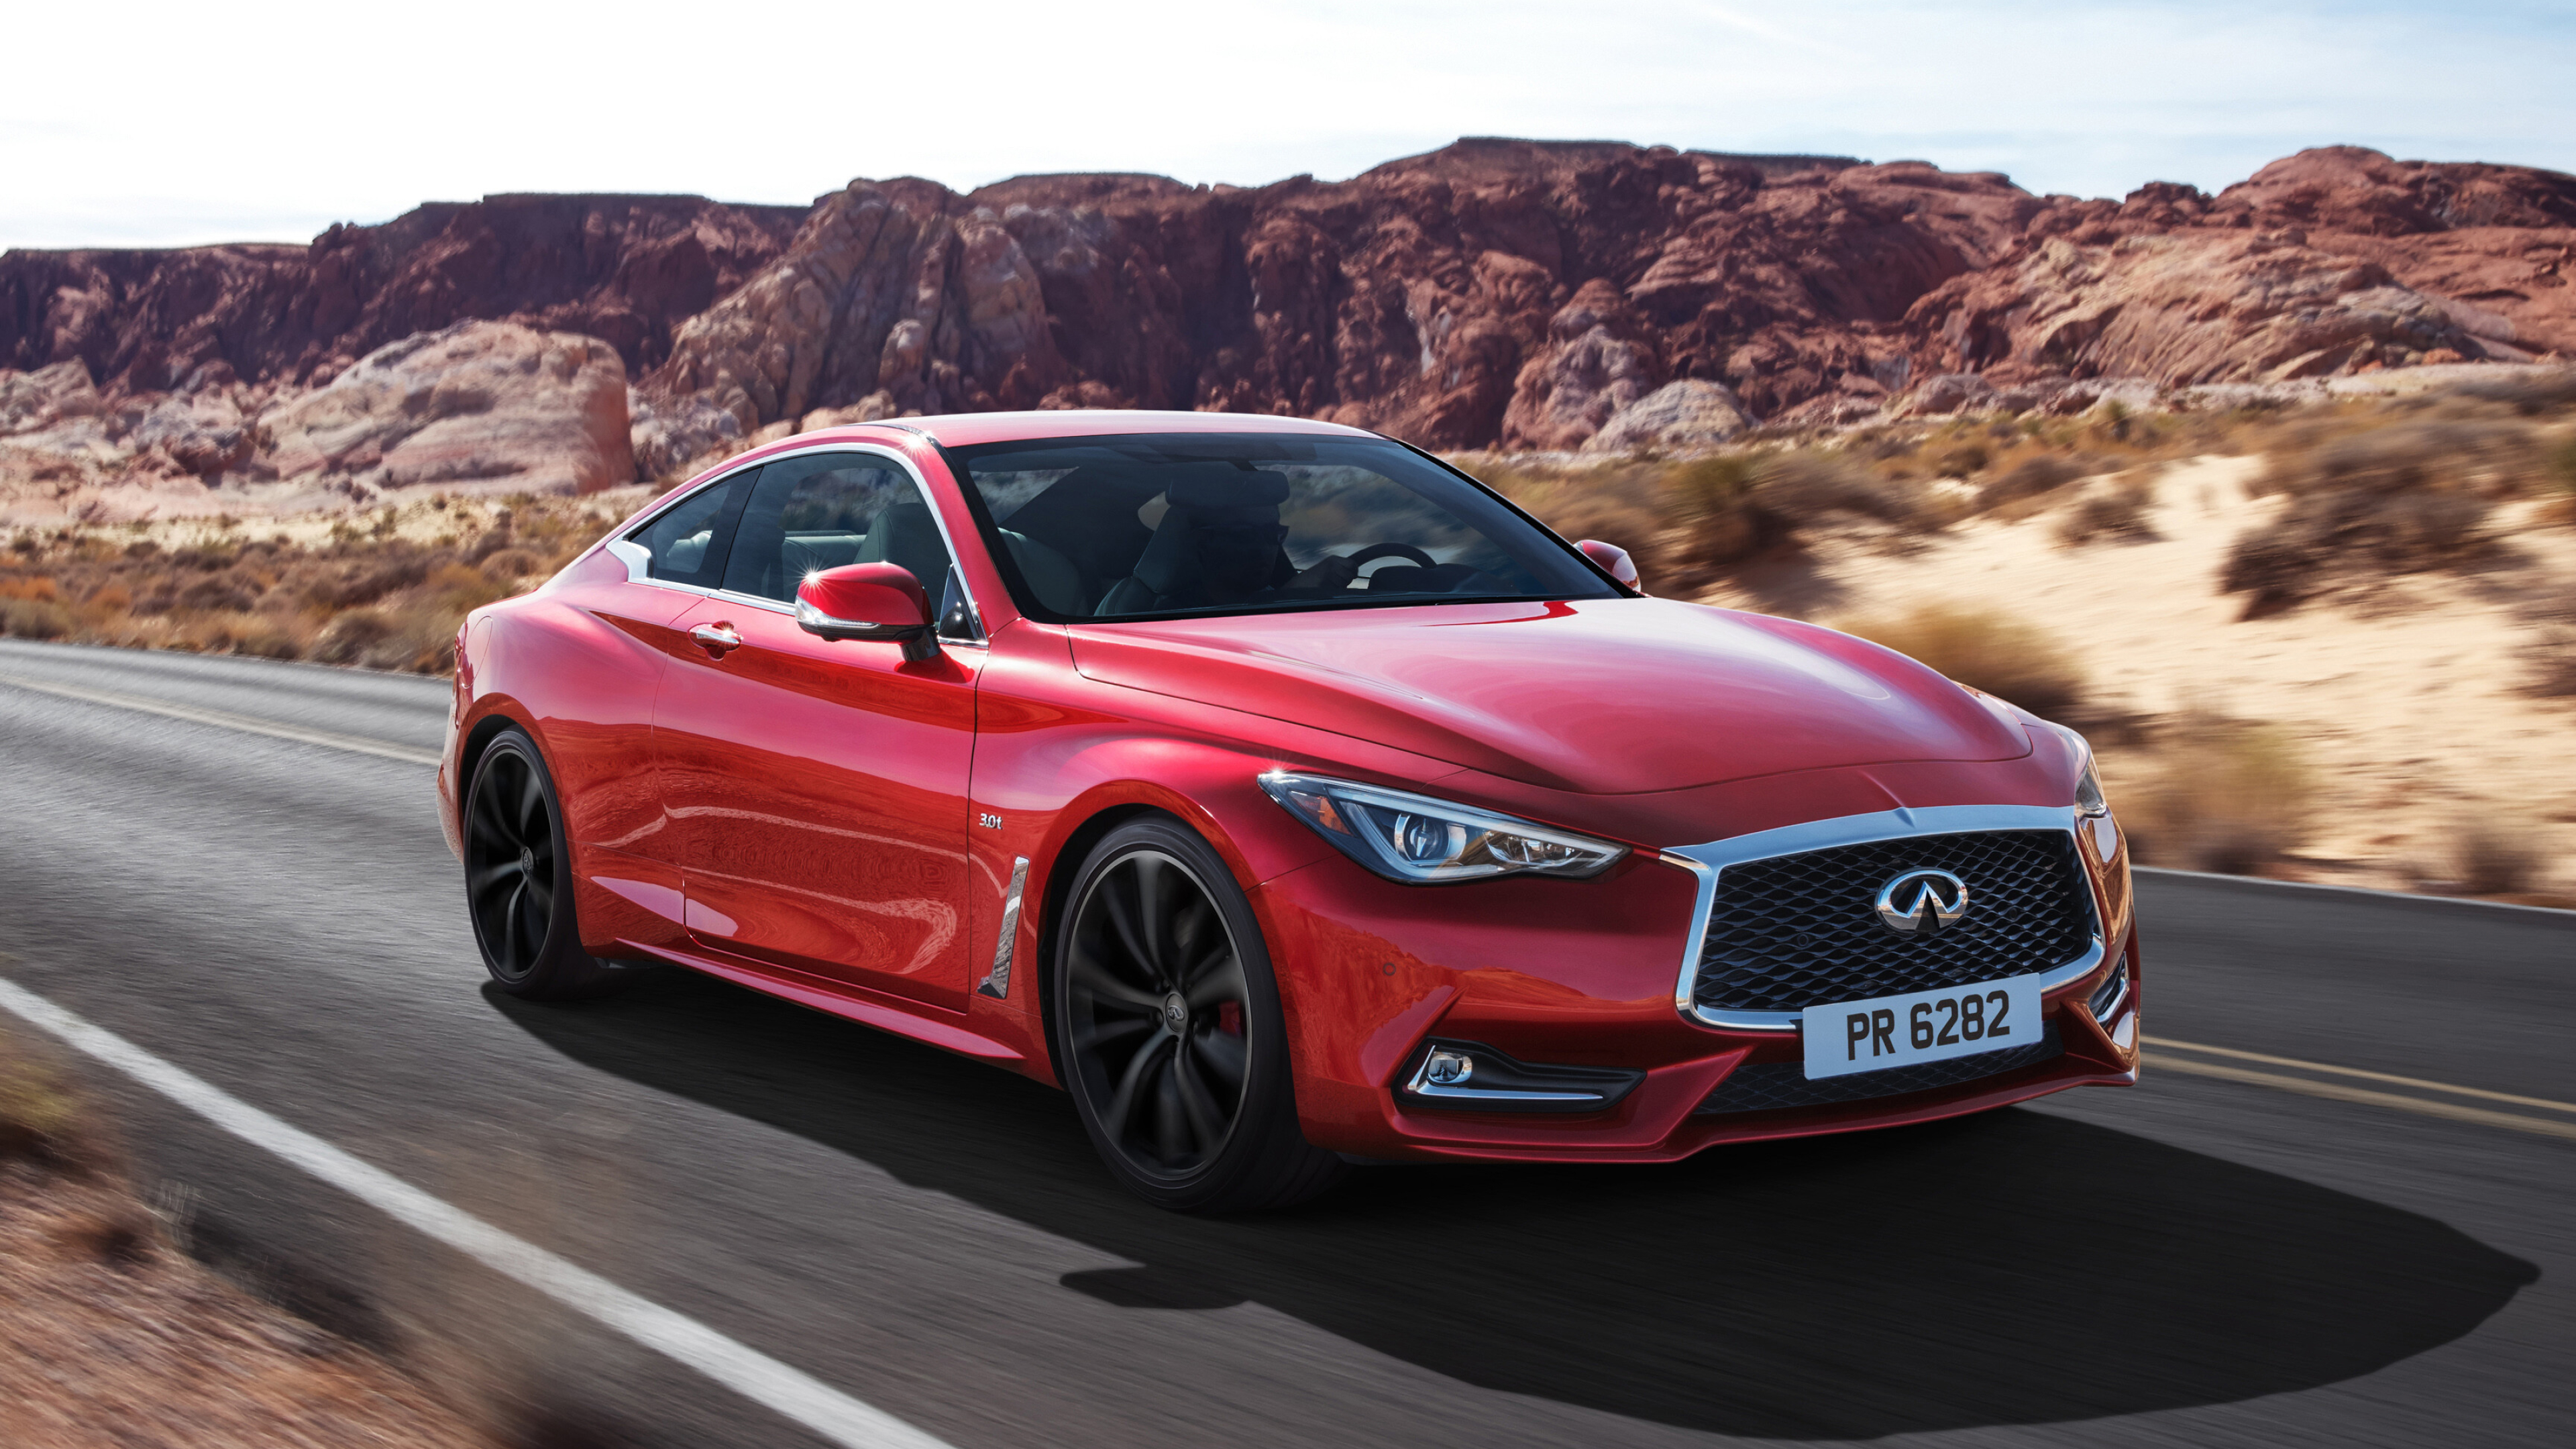 Infiniti: The Q60 luxury coupe, 2022, Equipped with a performance-inspired design, minimal wheel gap, and an award-winning 3.0-liter twin-turbo V6. 3840x2160 4K Wallpaper.